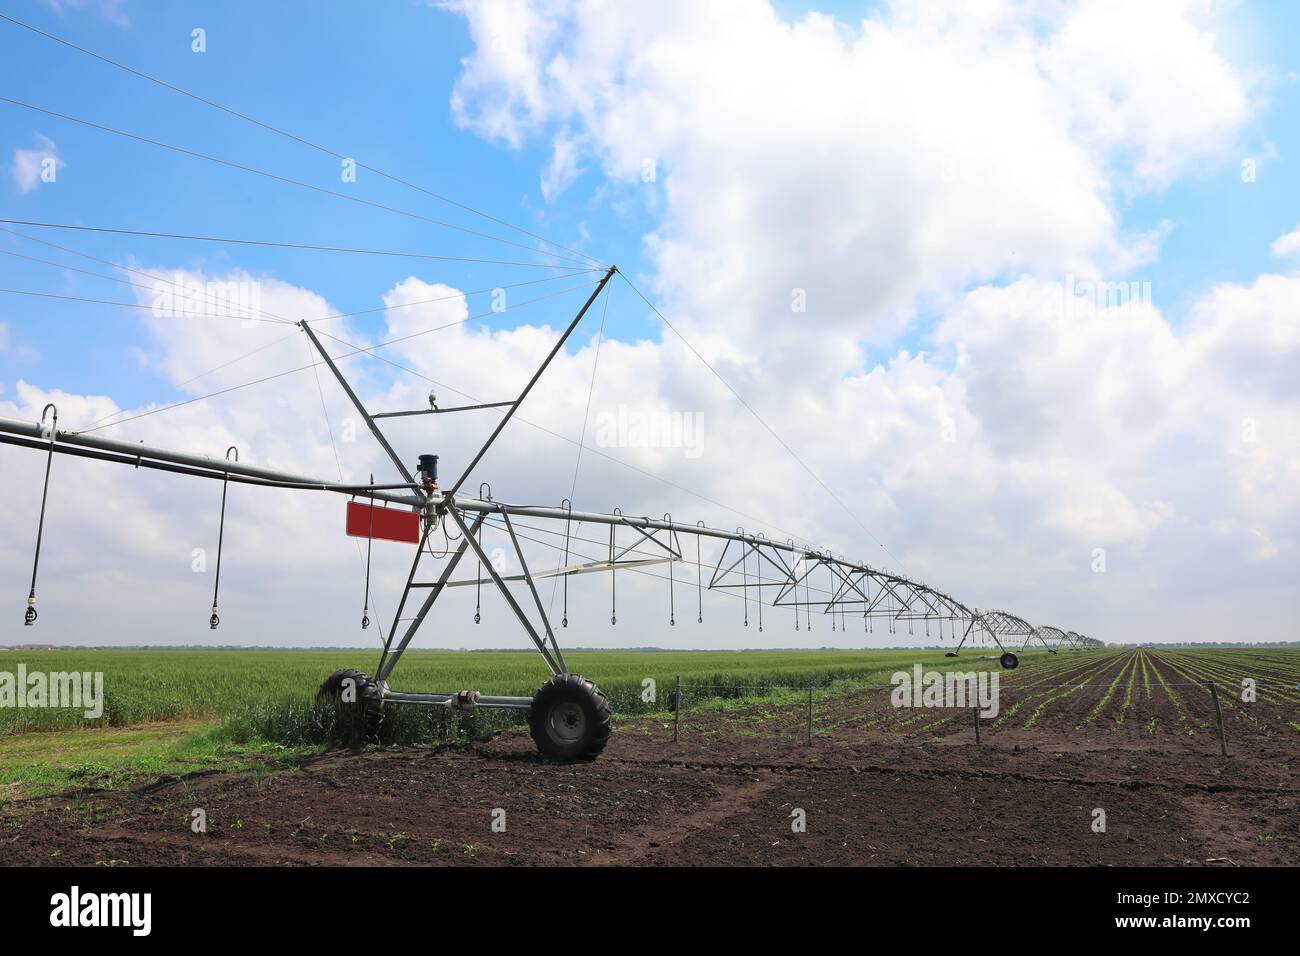 Collect picture of traditional and modern method of irrigation 